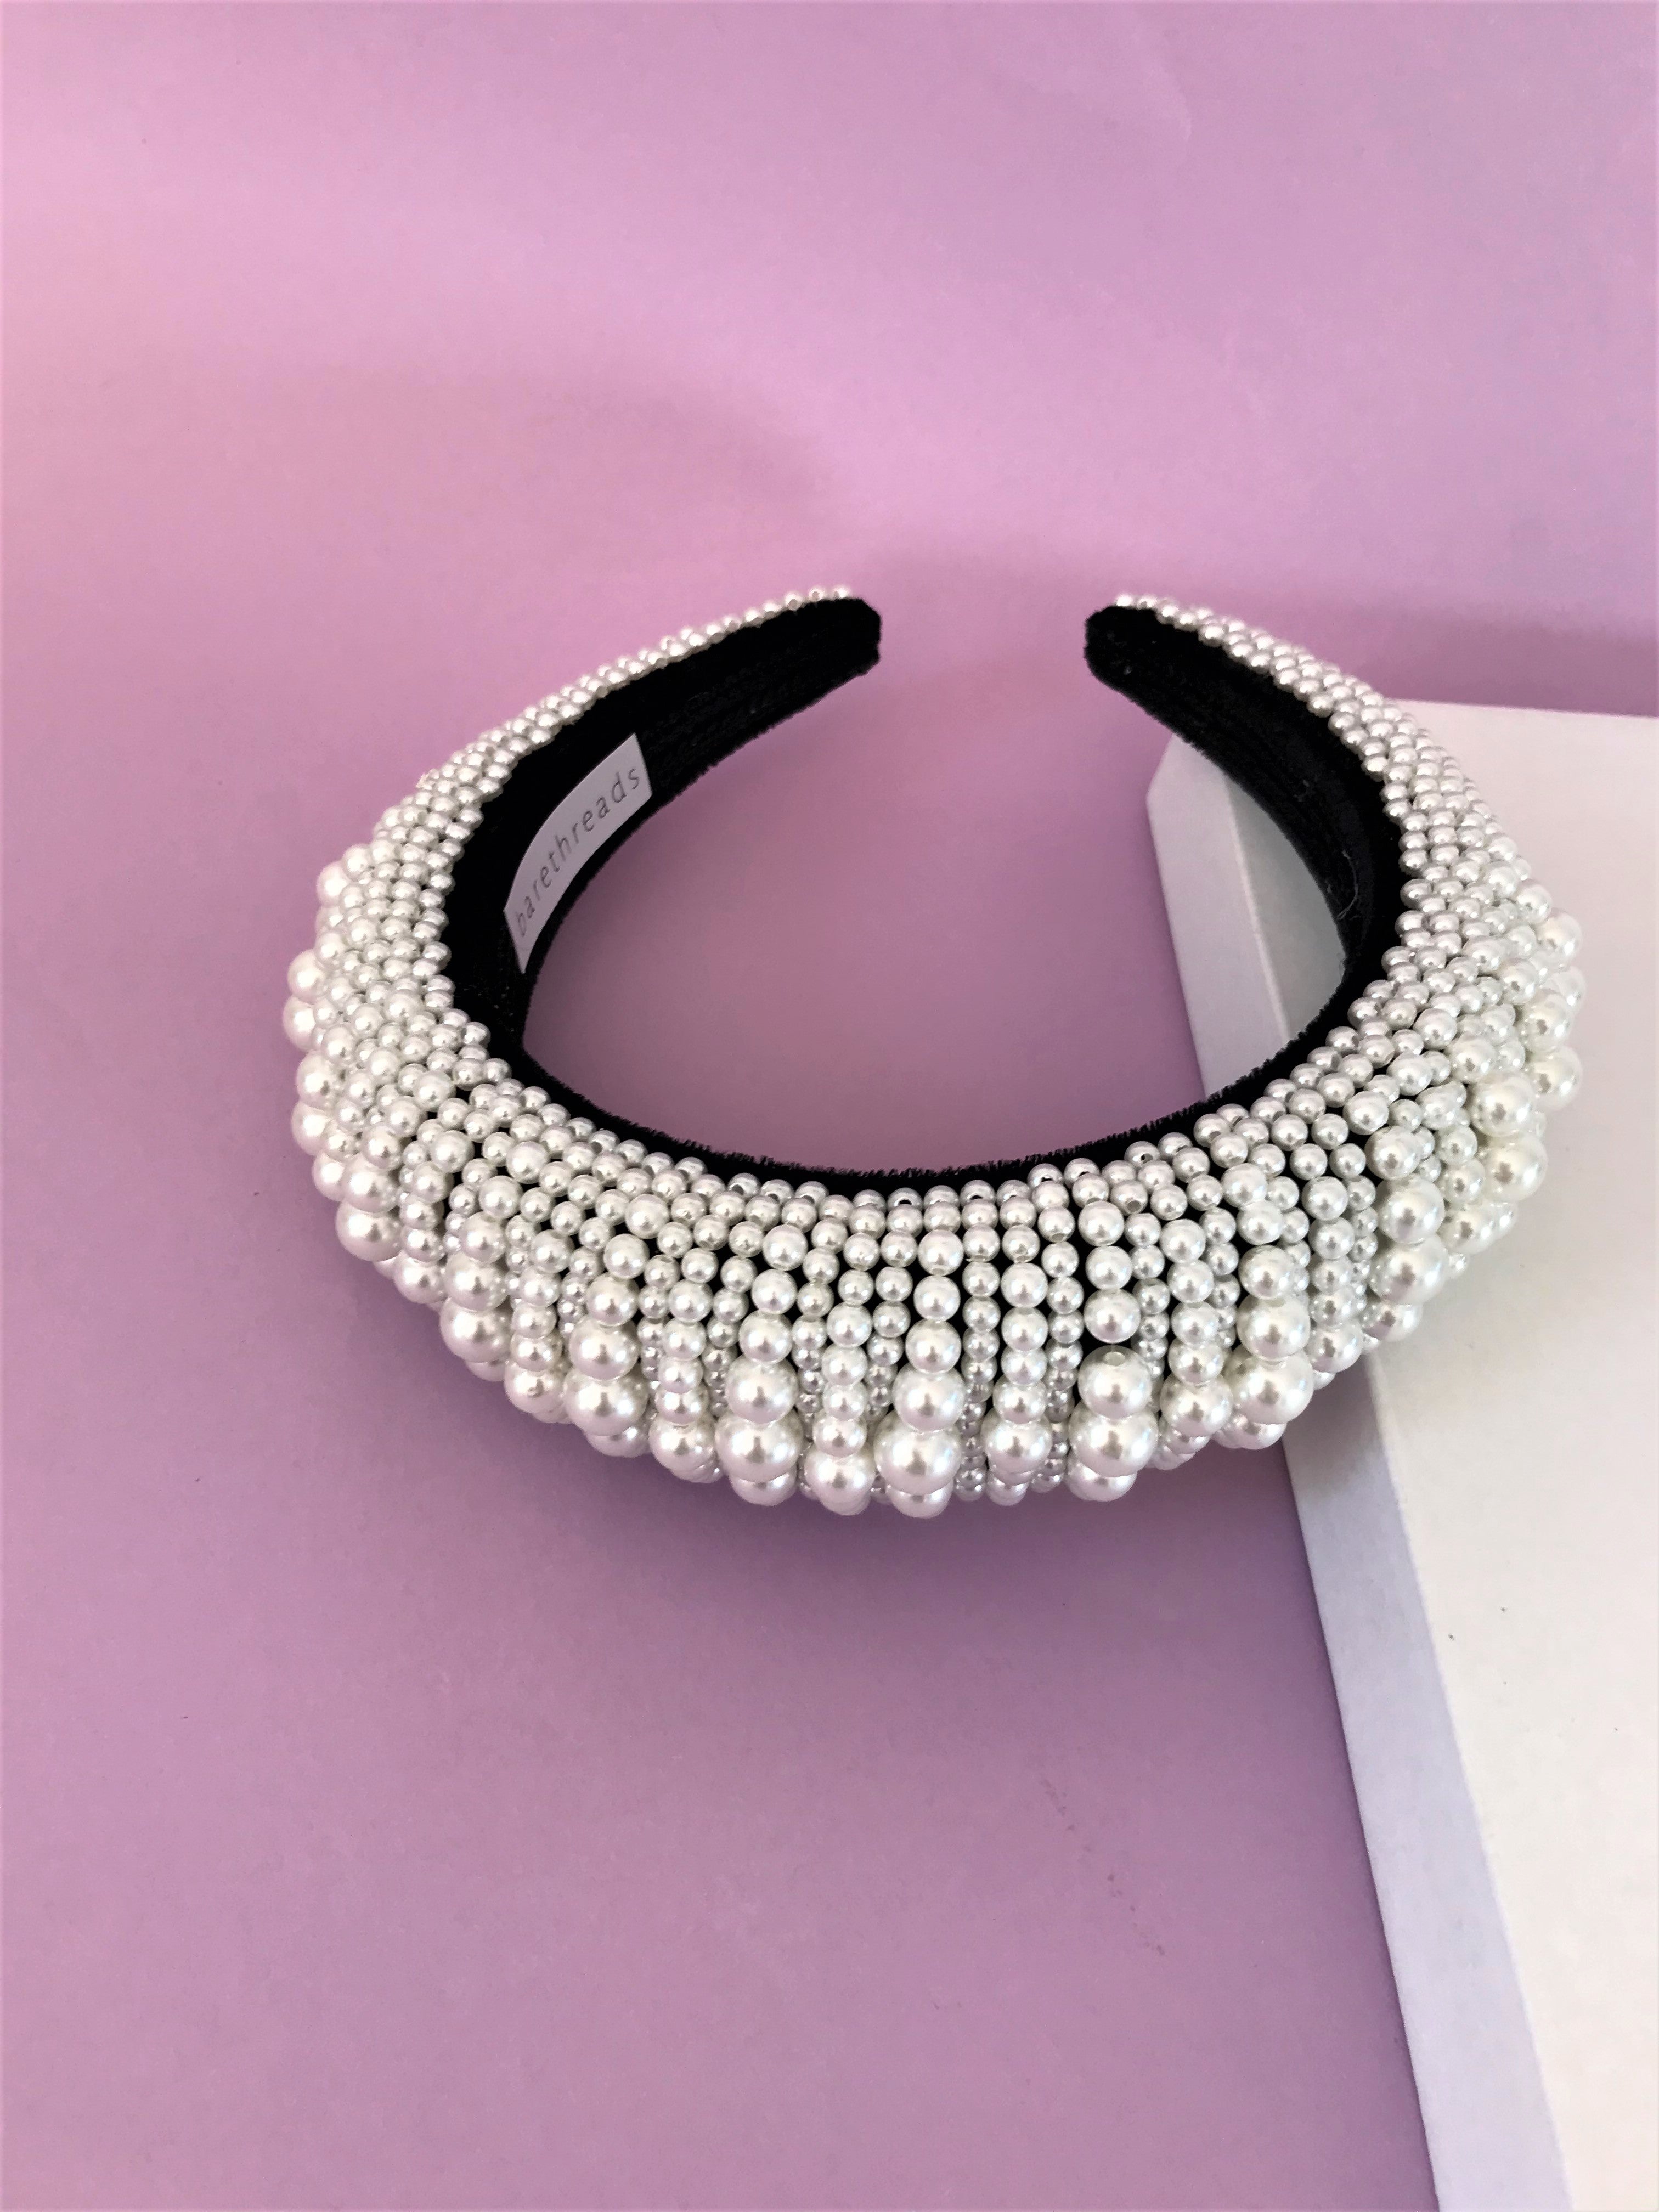 THE ASTERIA PADDED PEARL BAND